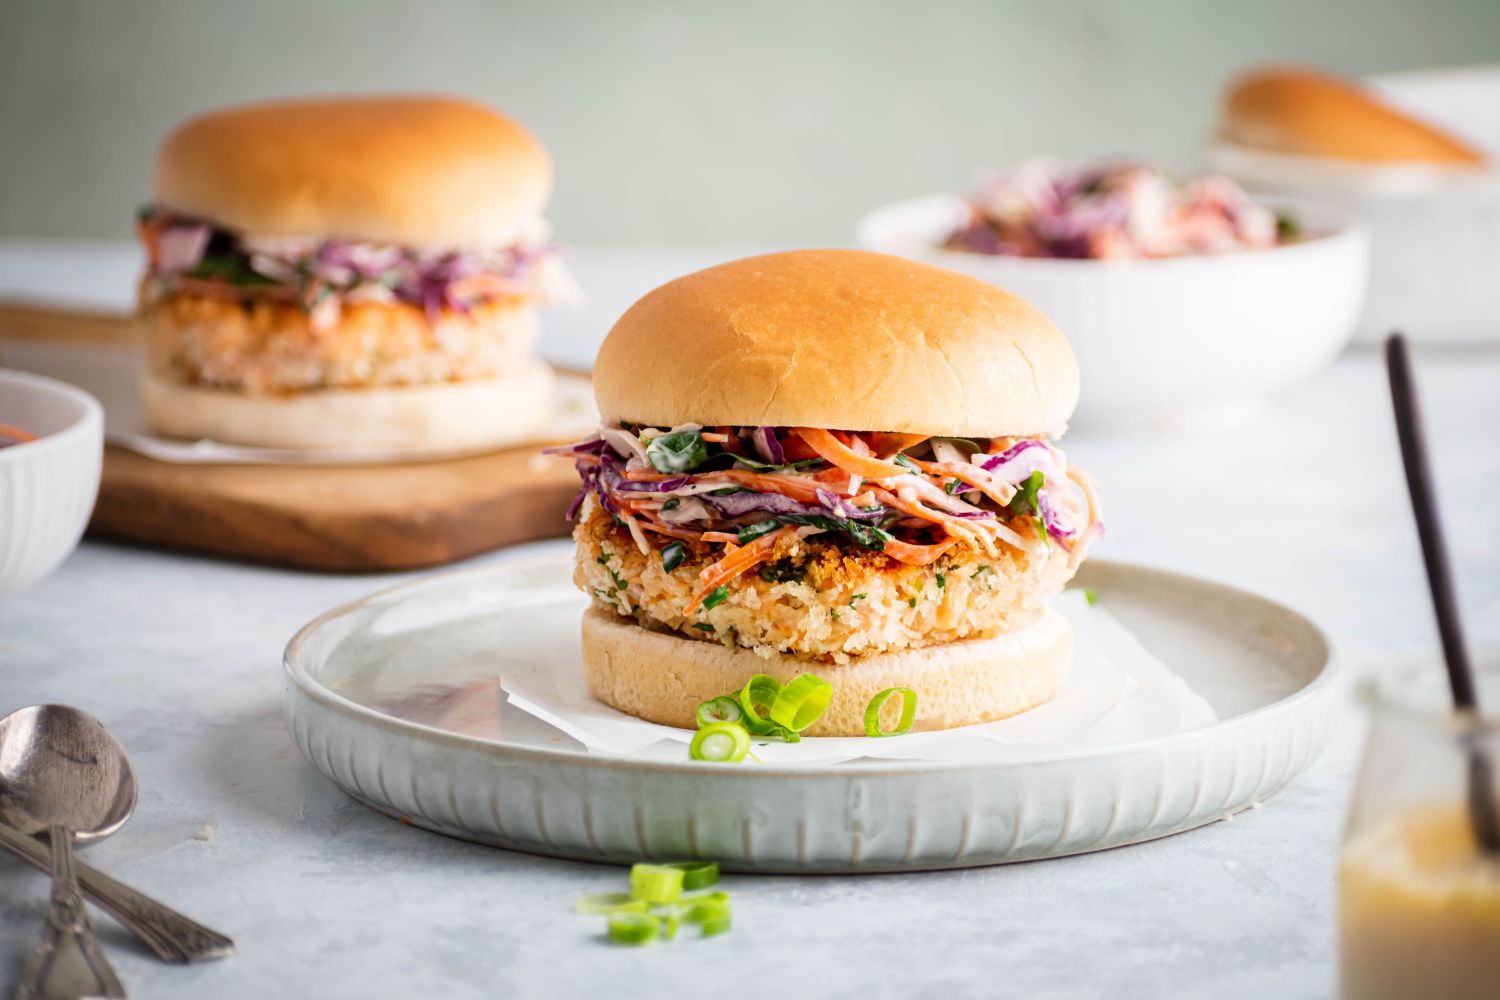 Salmon burgers with coleslaw on top served on a whole grain roll.